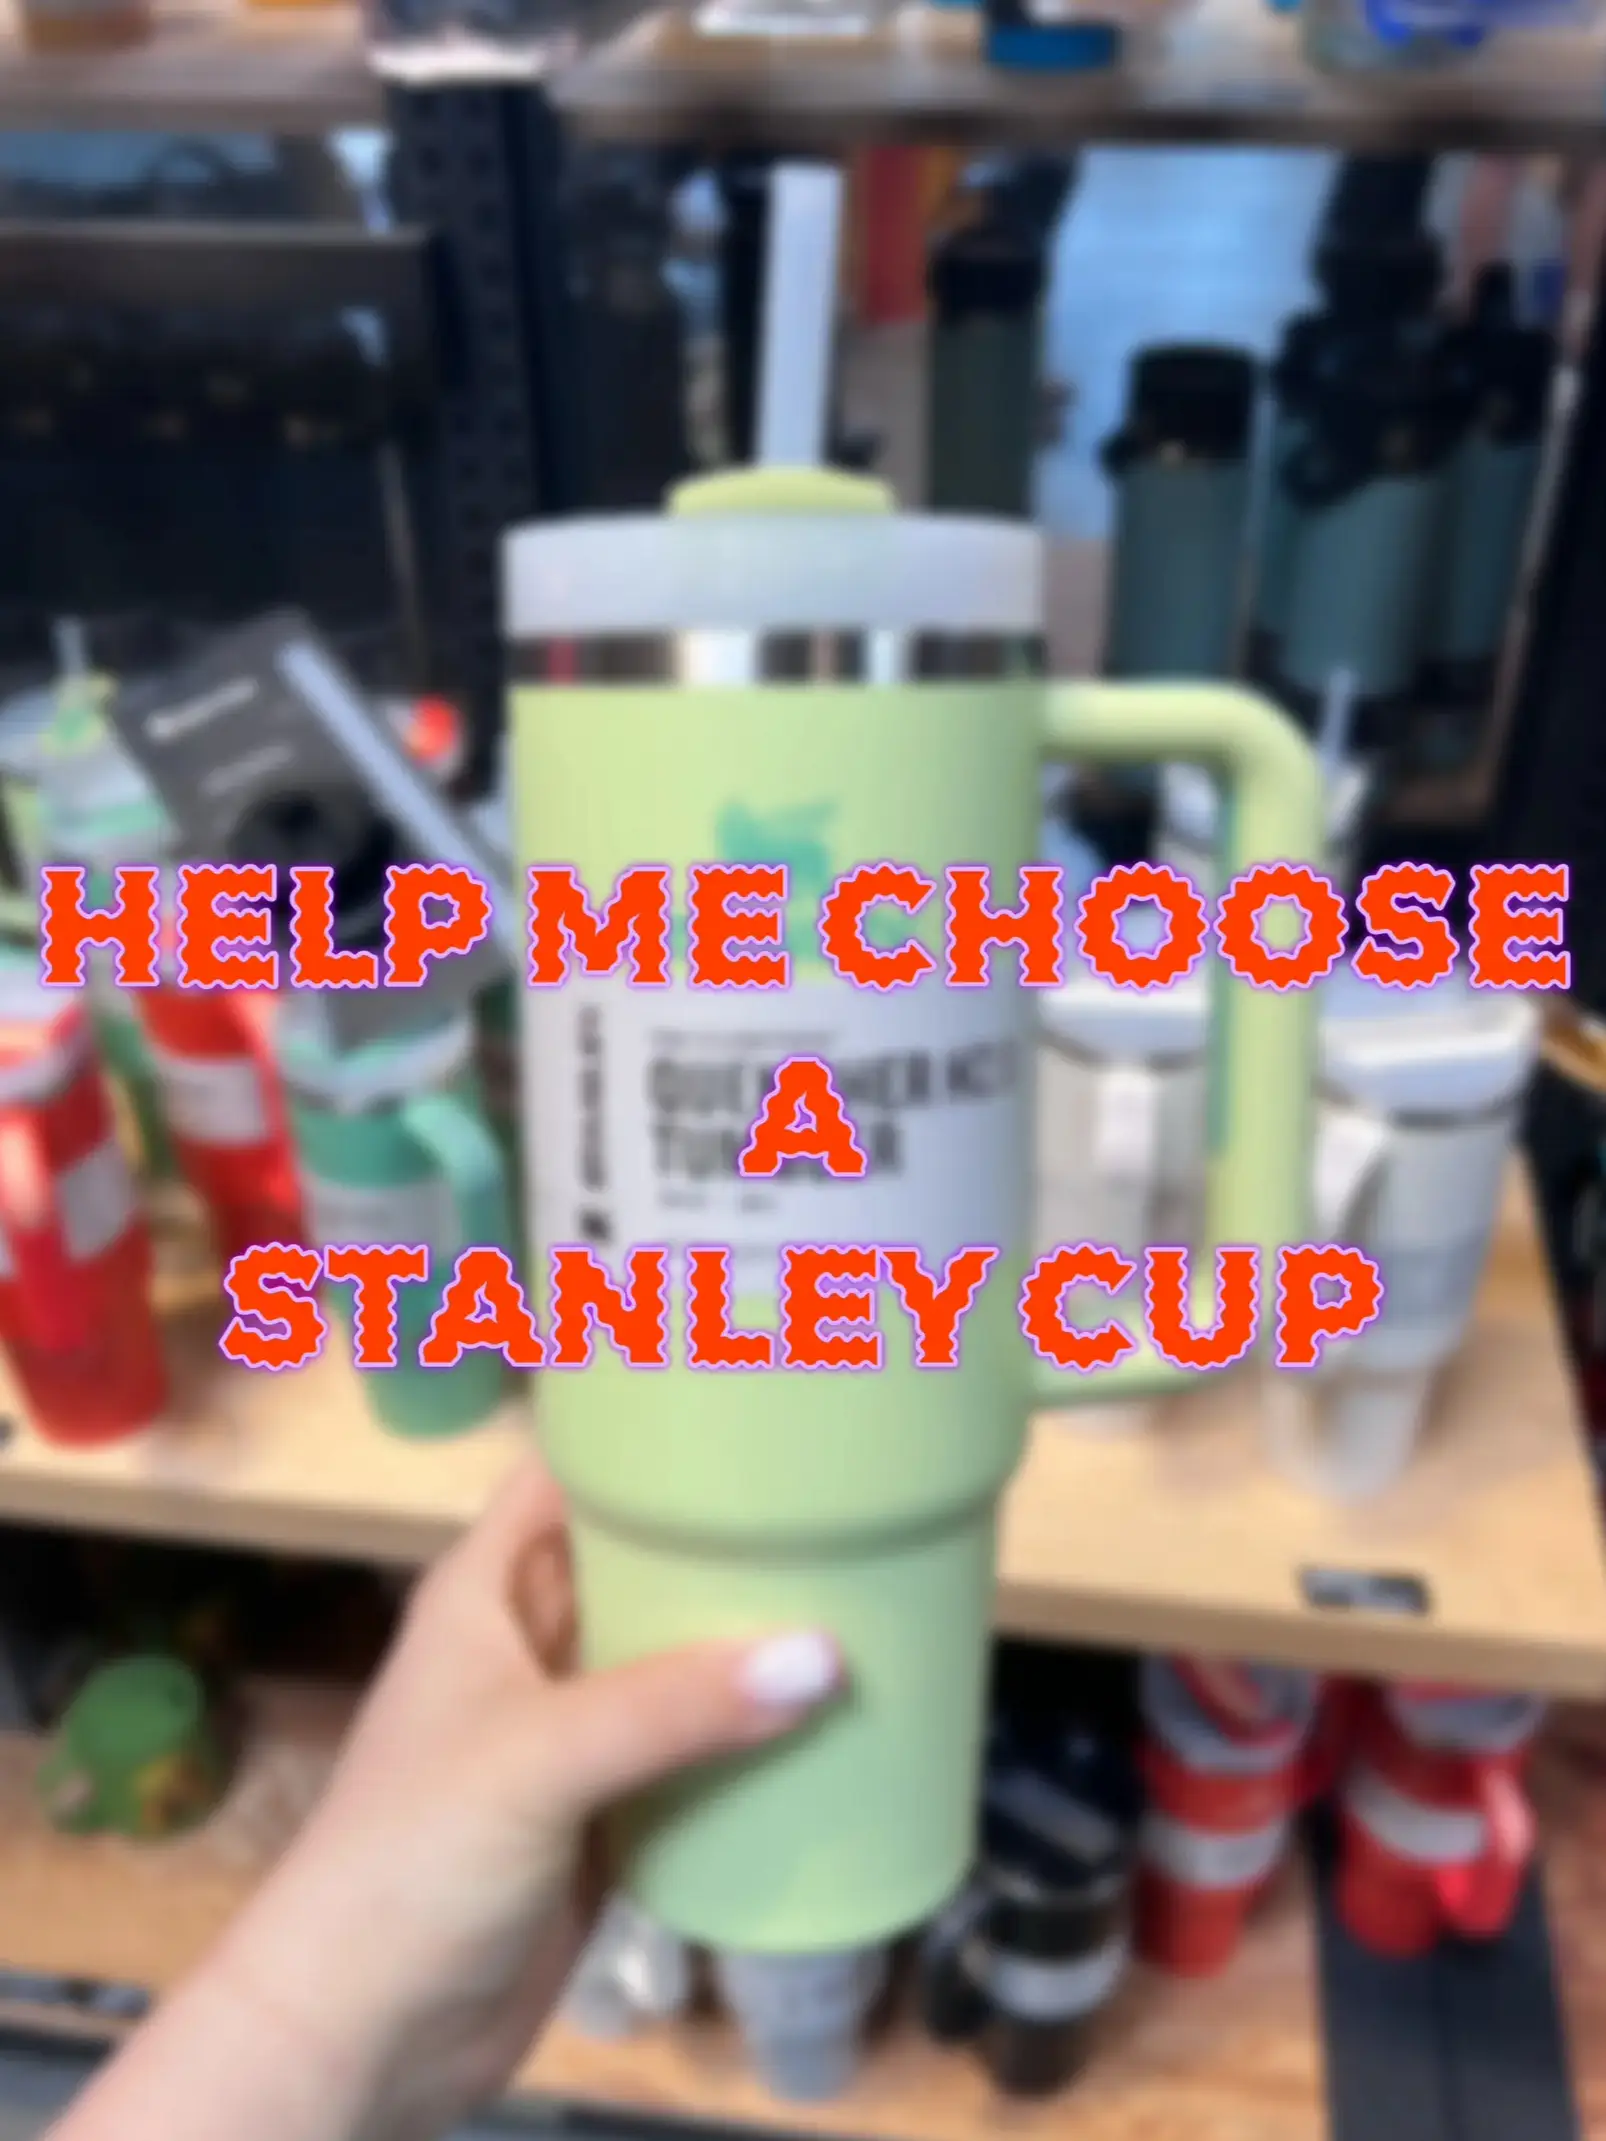 Unbox my new 30 oz stanley cup in rose quartz with me! #stanleycup